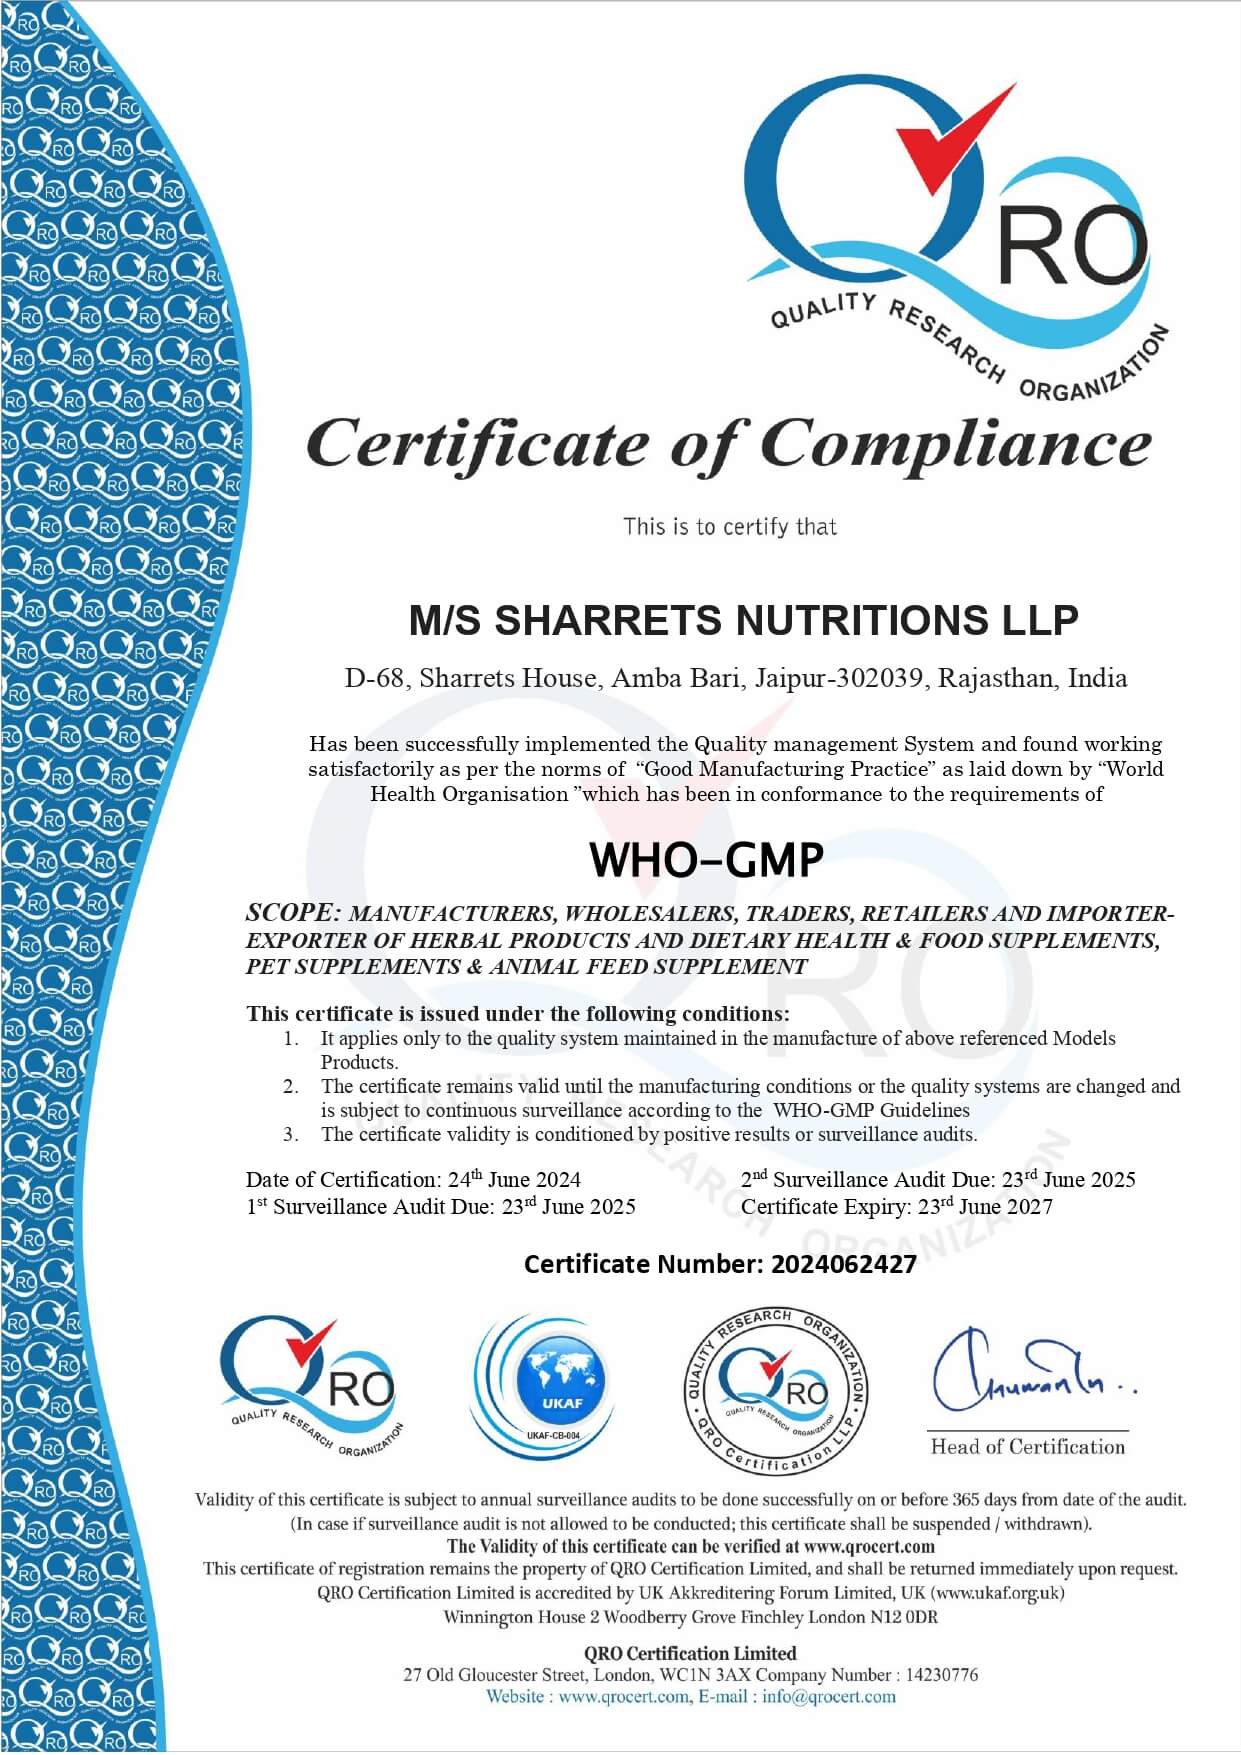 WHO GMP Certificate- Sharrets Nutritions